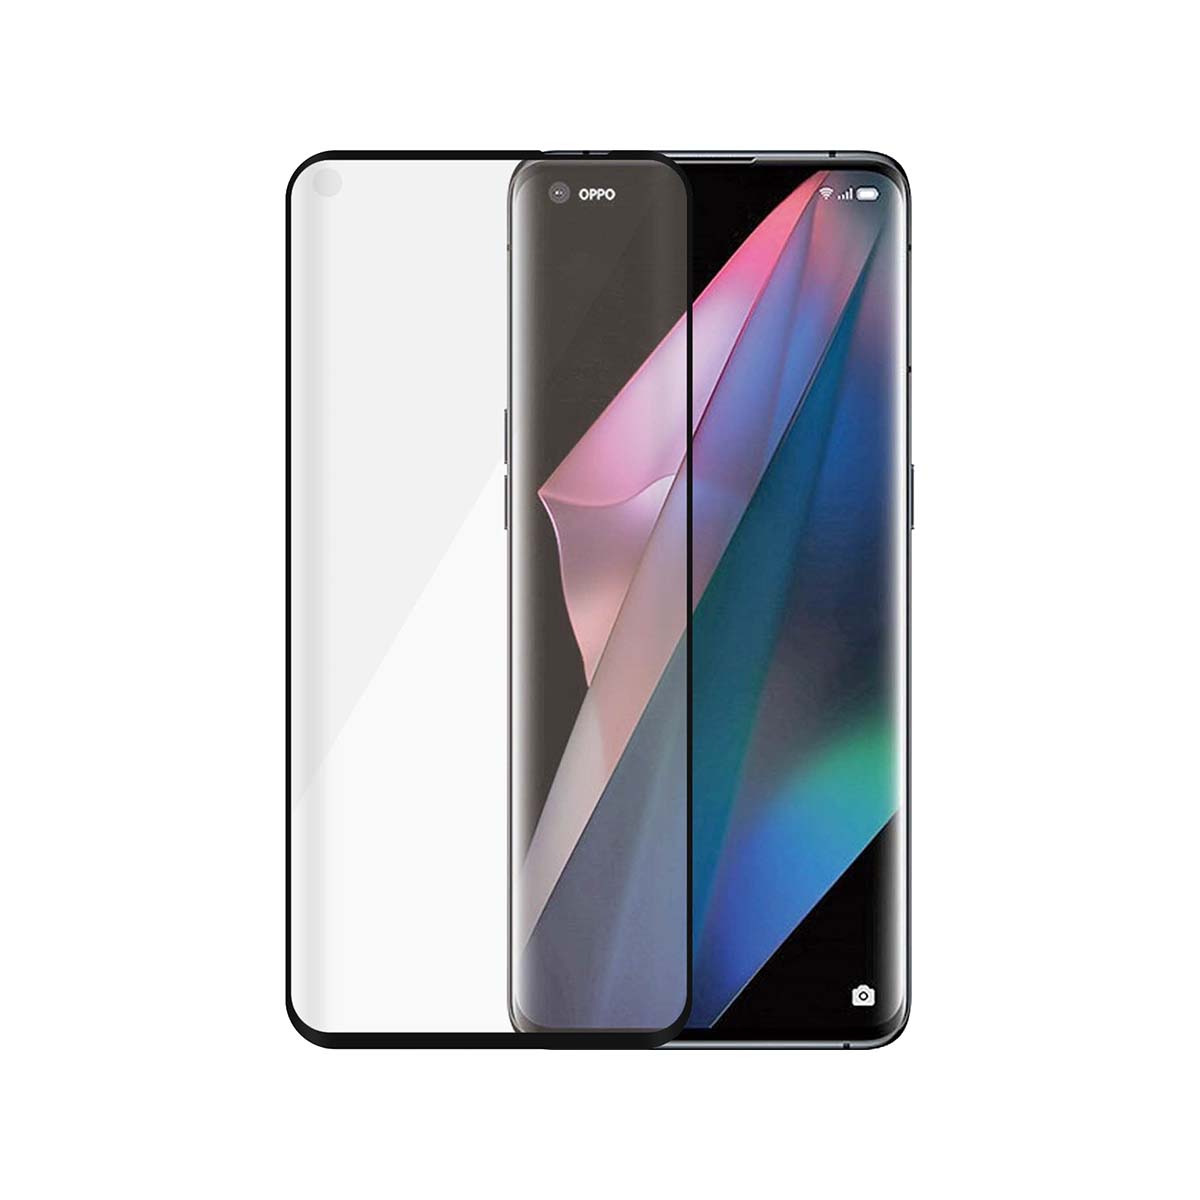 PanzerGlass CaseFriendly AB Screen Protector for Oppo Find X5/X3 Neo - Black